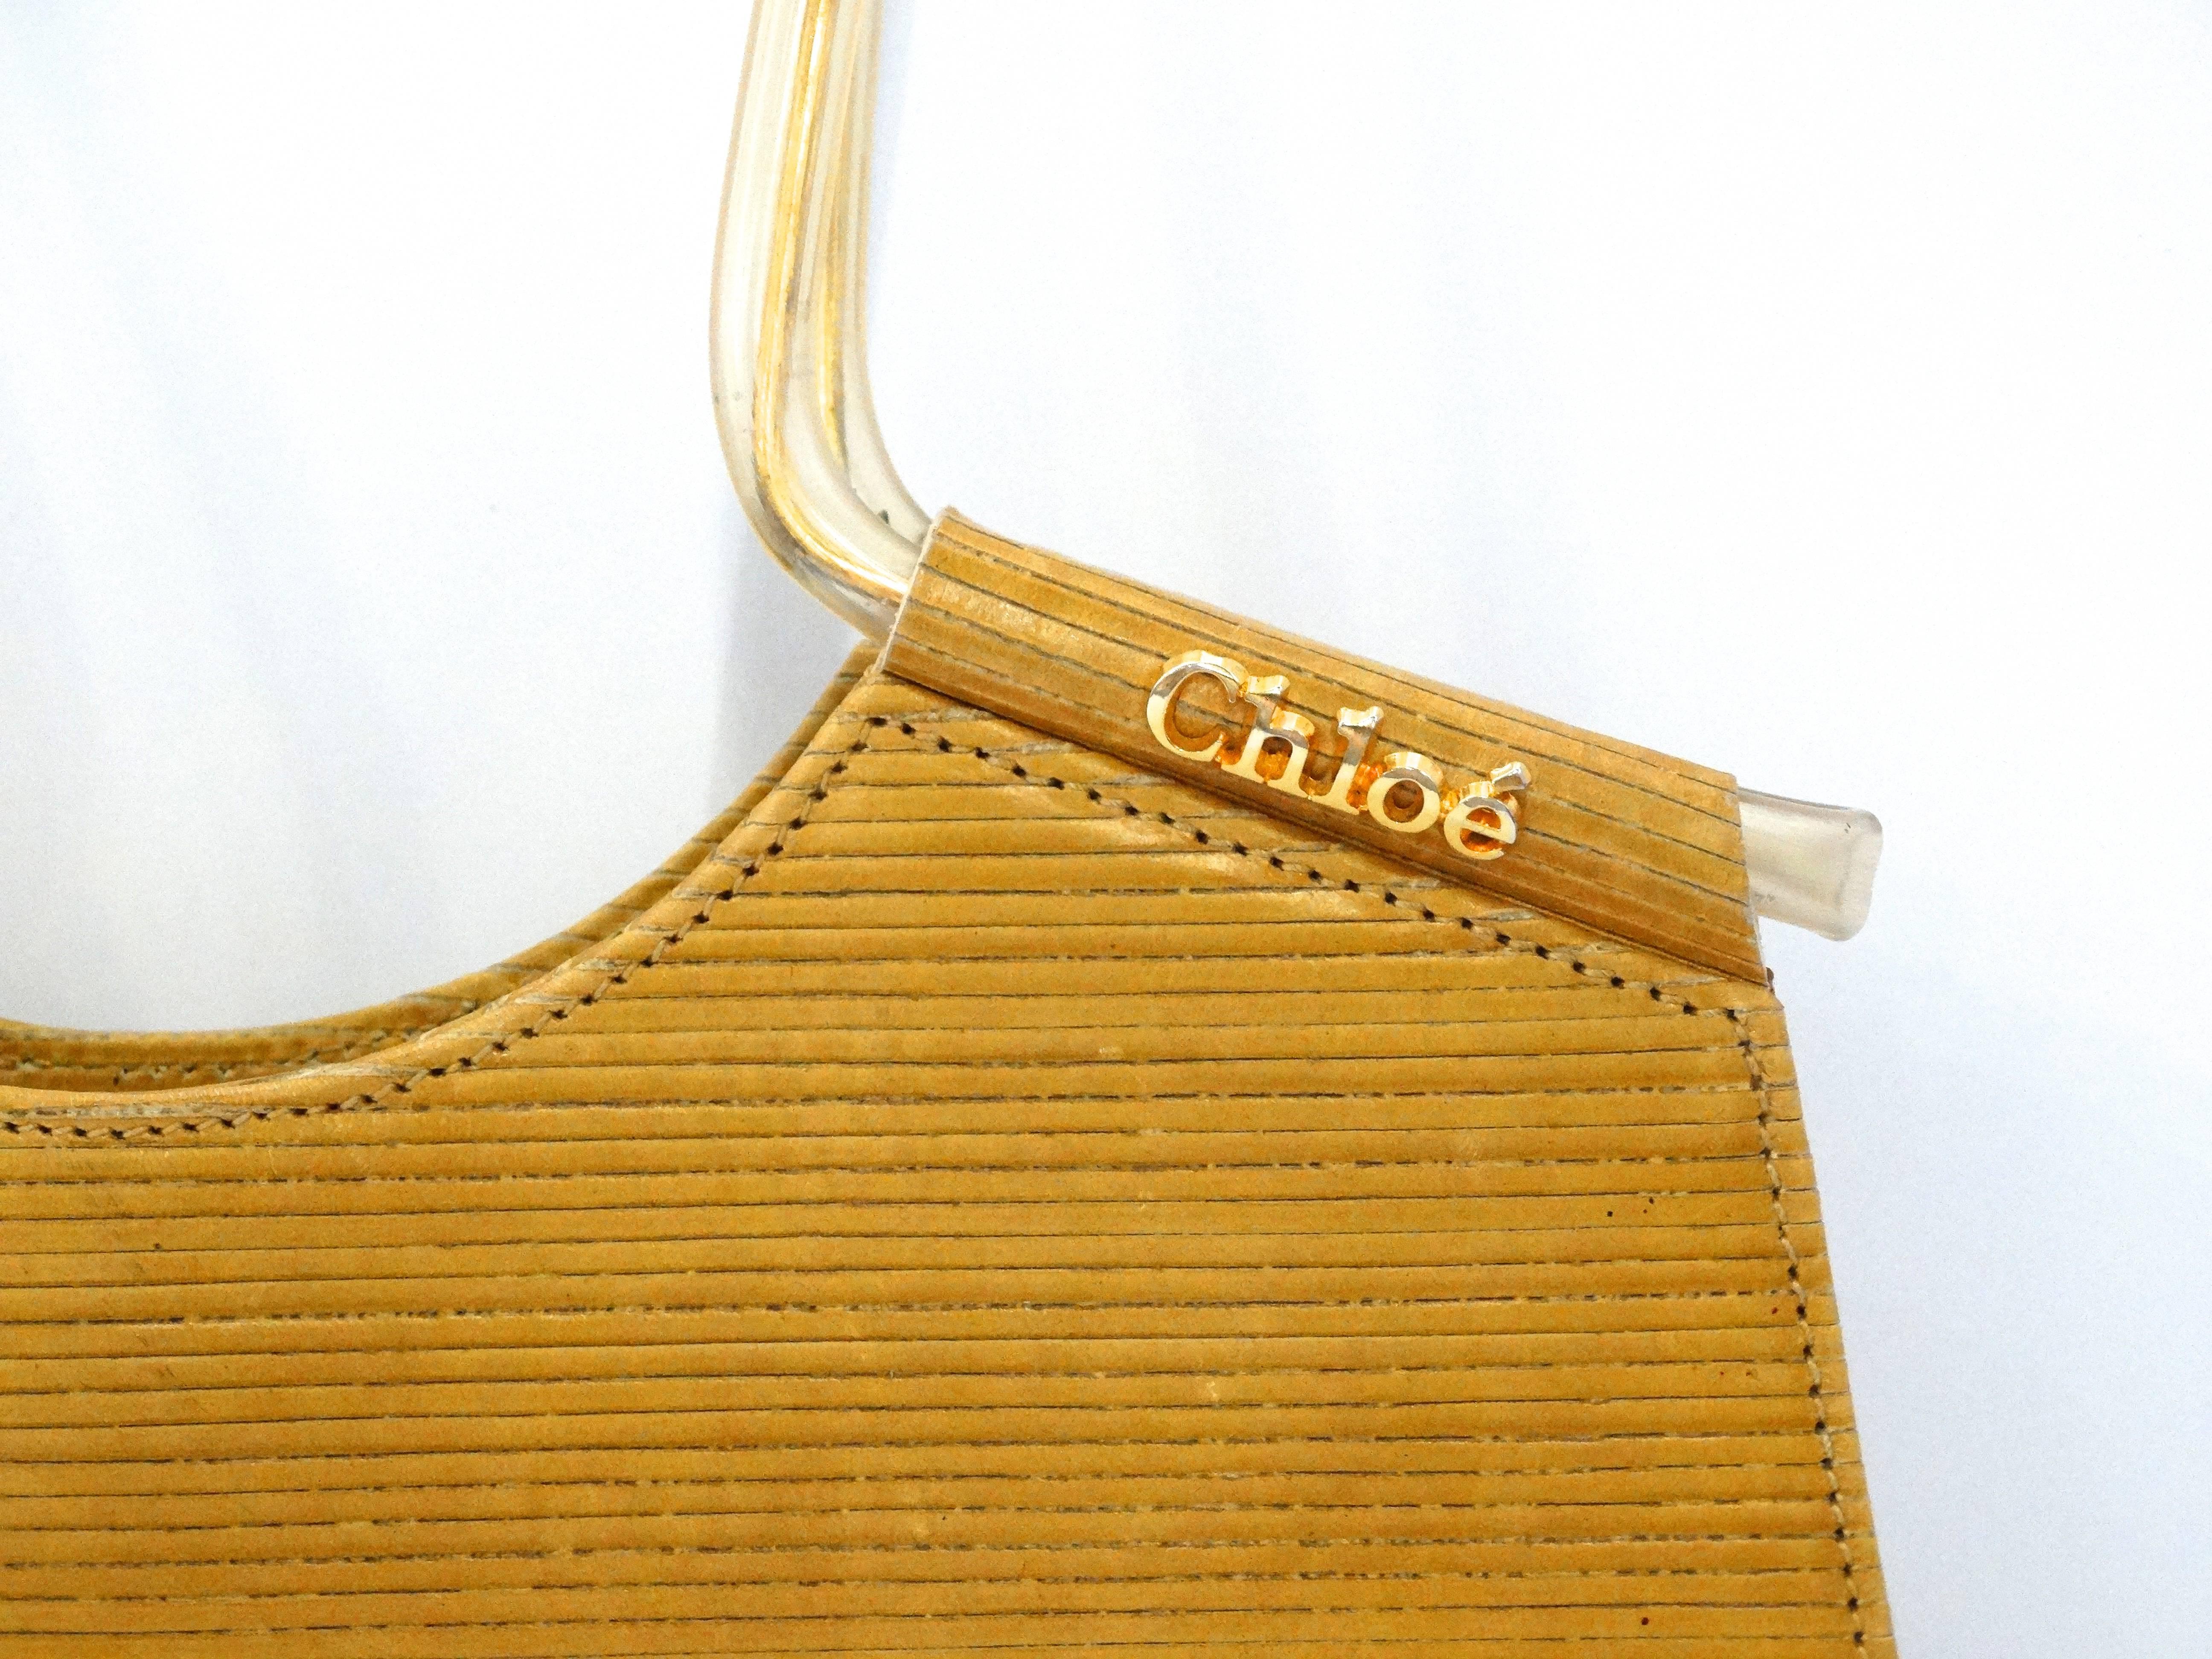 This wonderful Chloe from the 1970’s is the epitome of legendary style. Very rare top handle handbag in epi-like leather with very cool handles.  You will never have a chance like this again to obtain a piece of fashion history designed by Karl